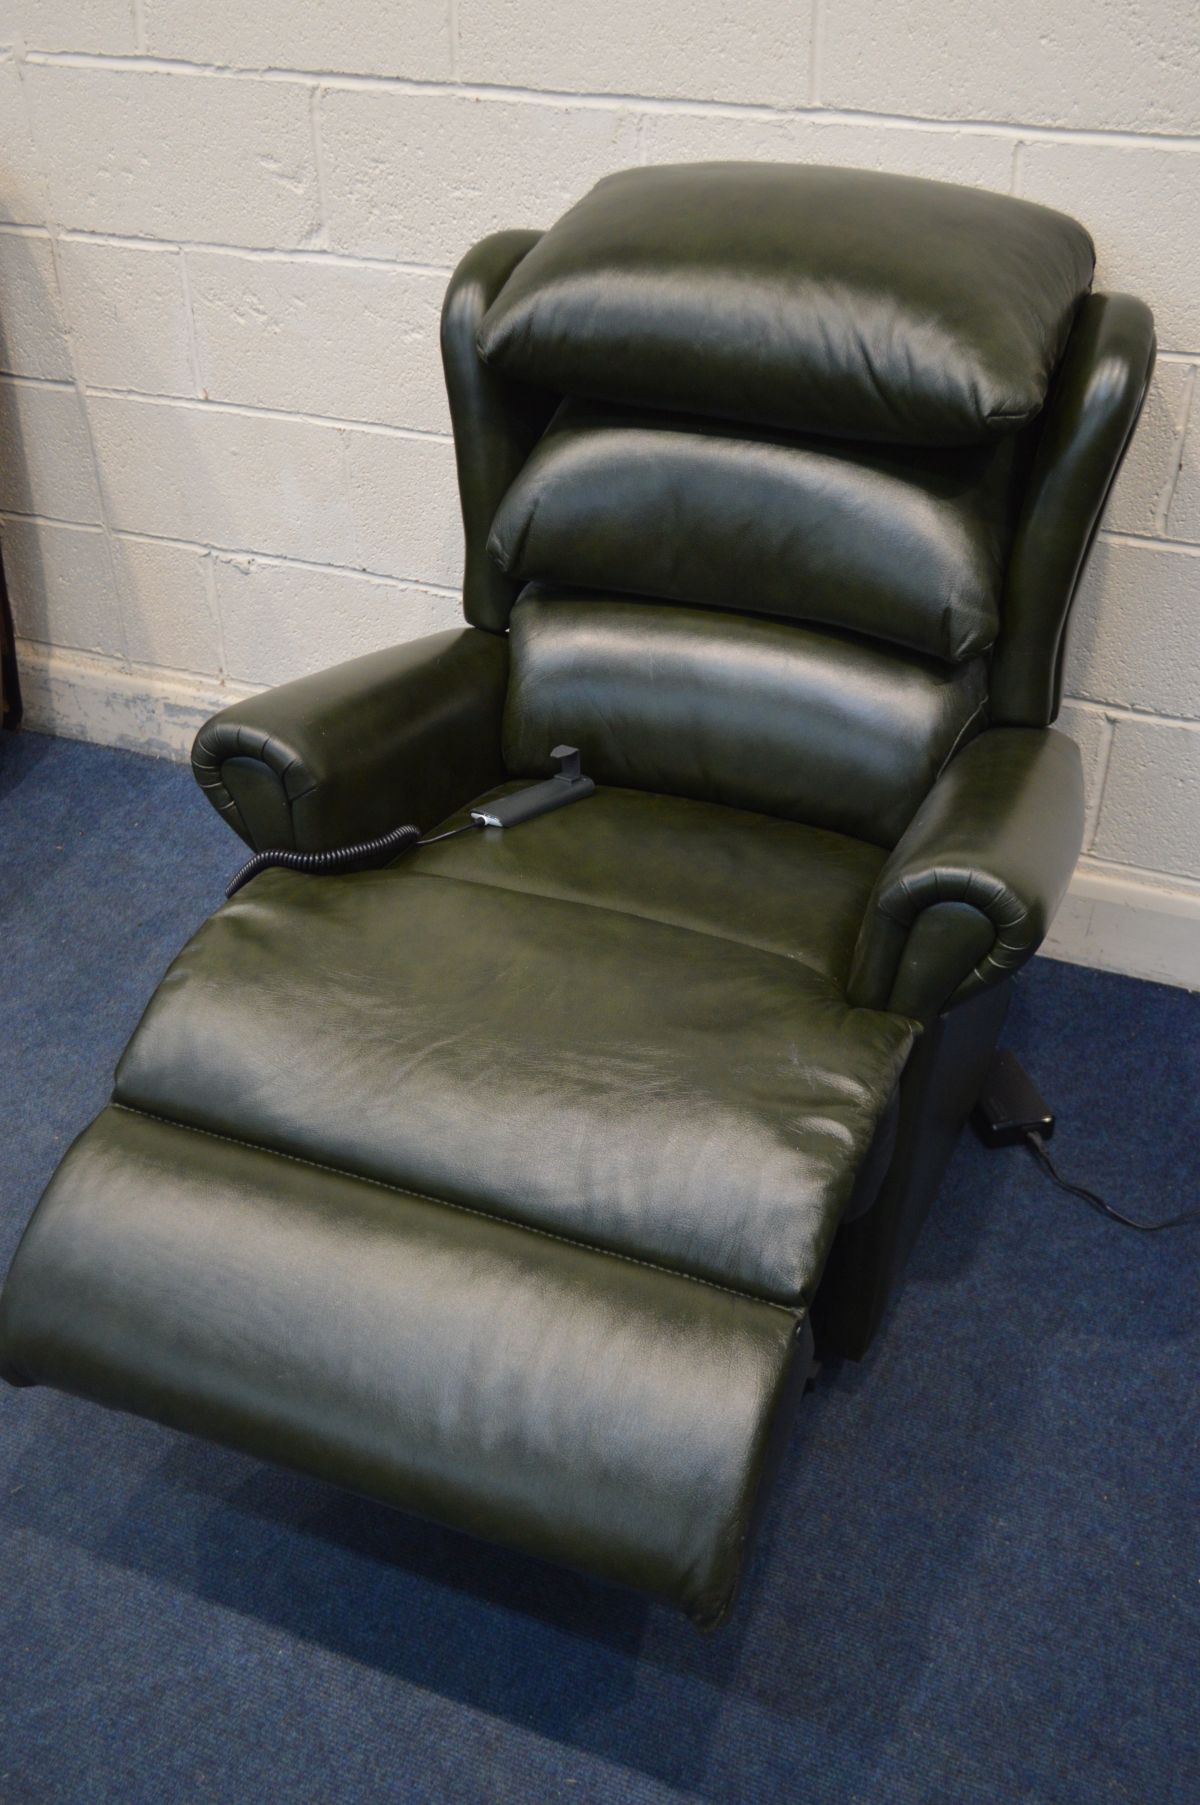 A SHERBOURNE GREEN LEATHER RISE AND RECLINE ARMCHAIR (PAT pass and working) - Image 2 of 2